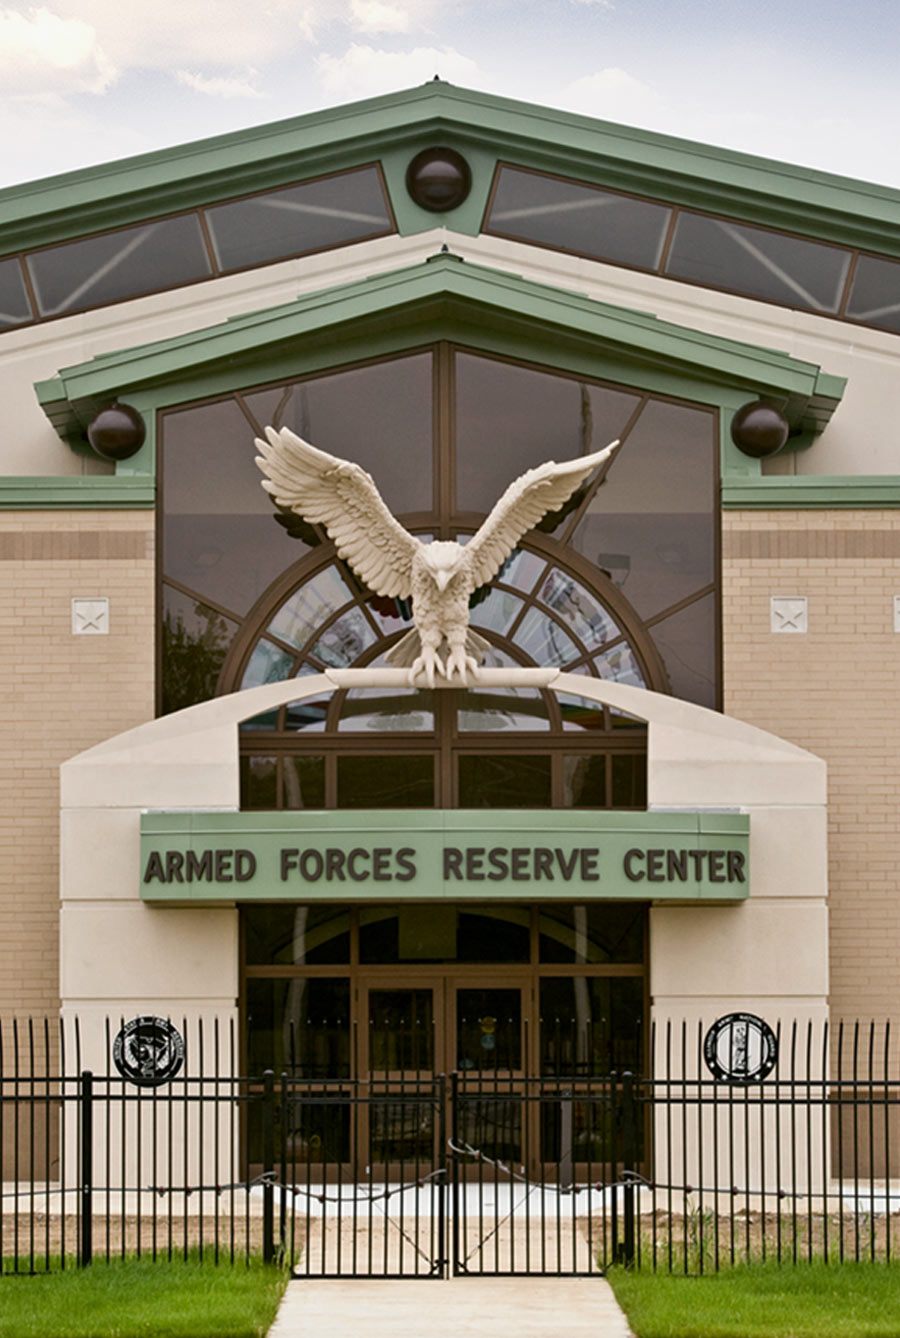 View of Main Entrance of The Armed Forces Reserve Center in Mount Vernon, Illinois